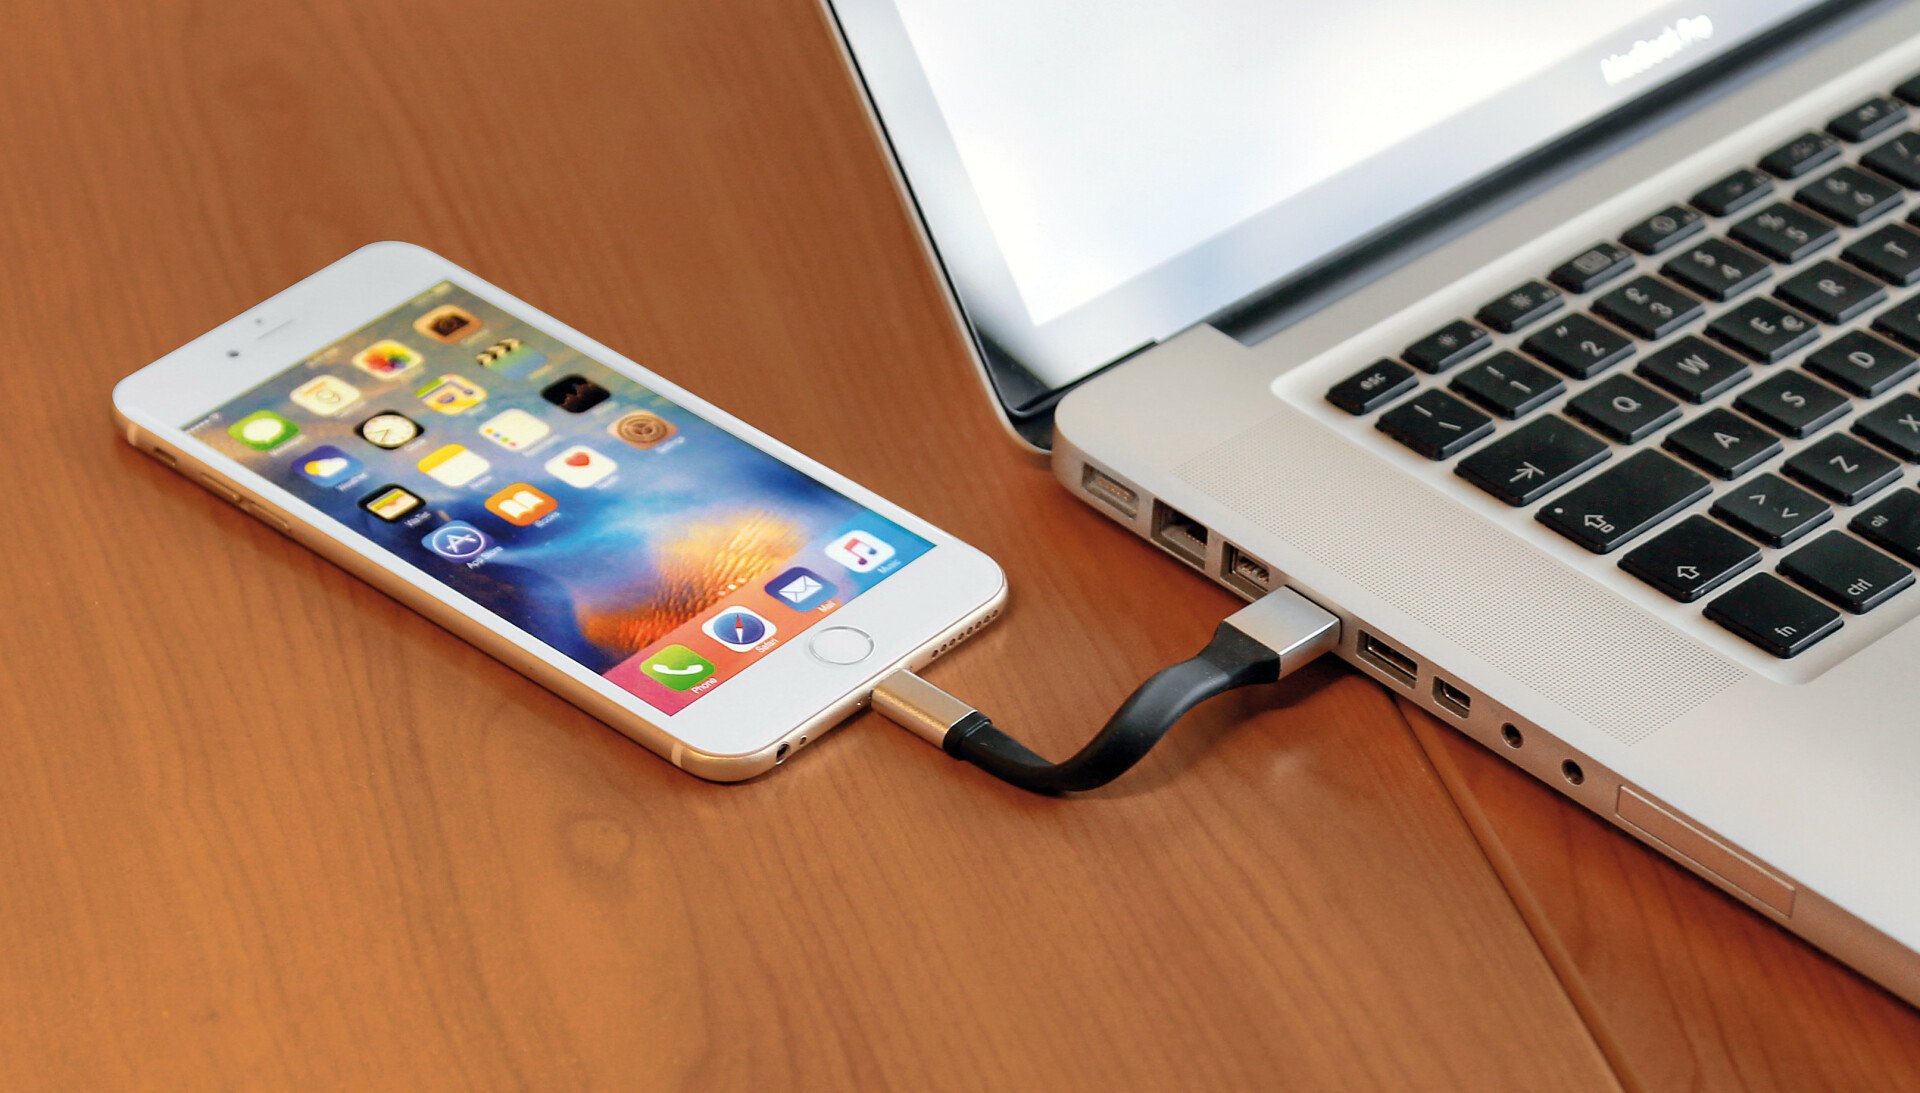 Key chain with Usb > Lightning cable - 10 cm thumb